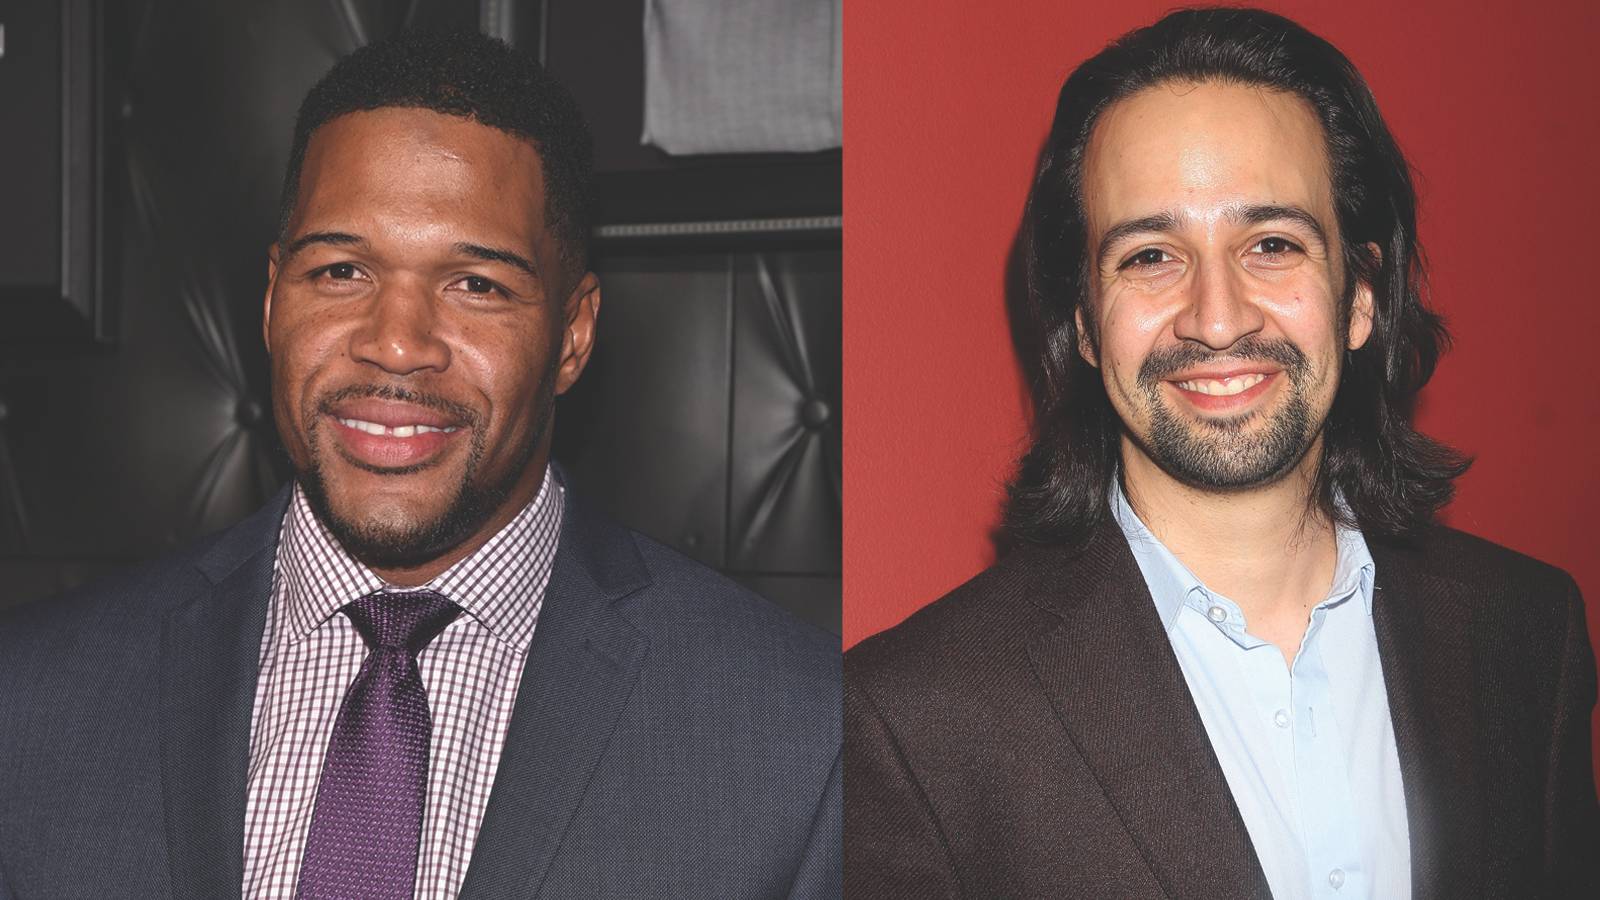 Look At Michael Strahan Show Hamilton Star How Mangled Fingers Throw Gang Signs News Bet 